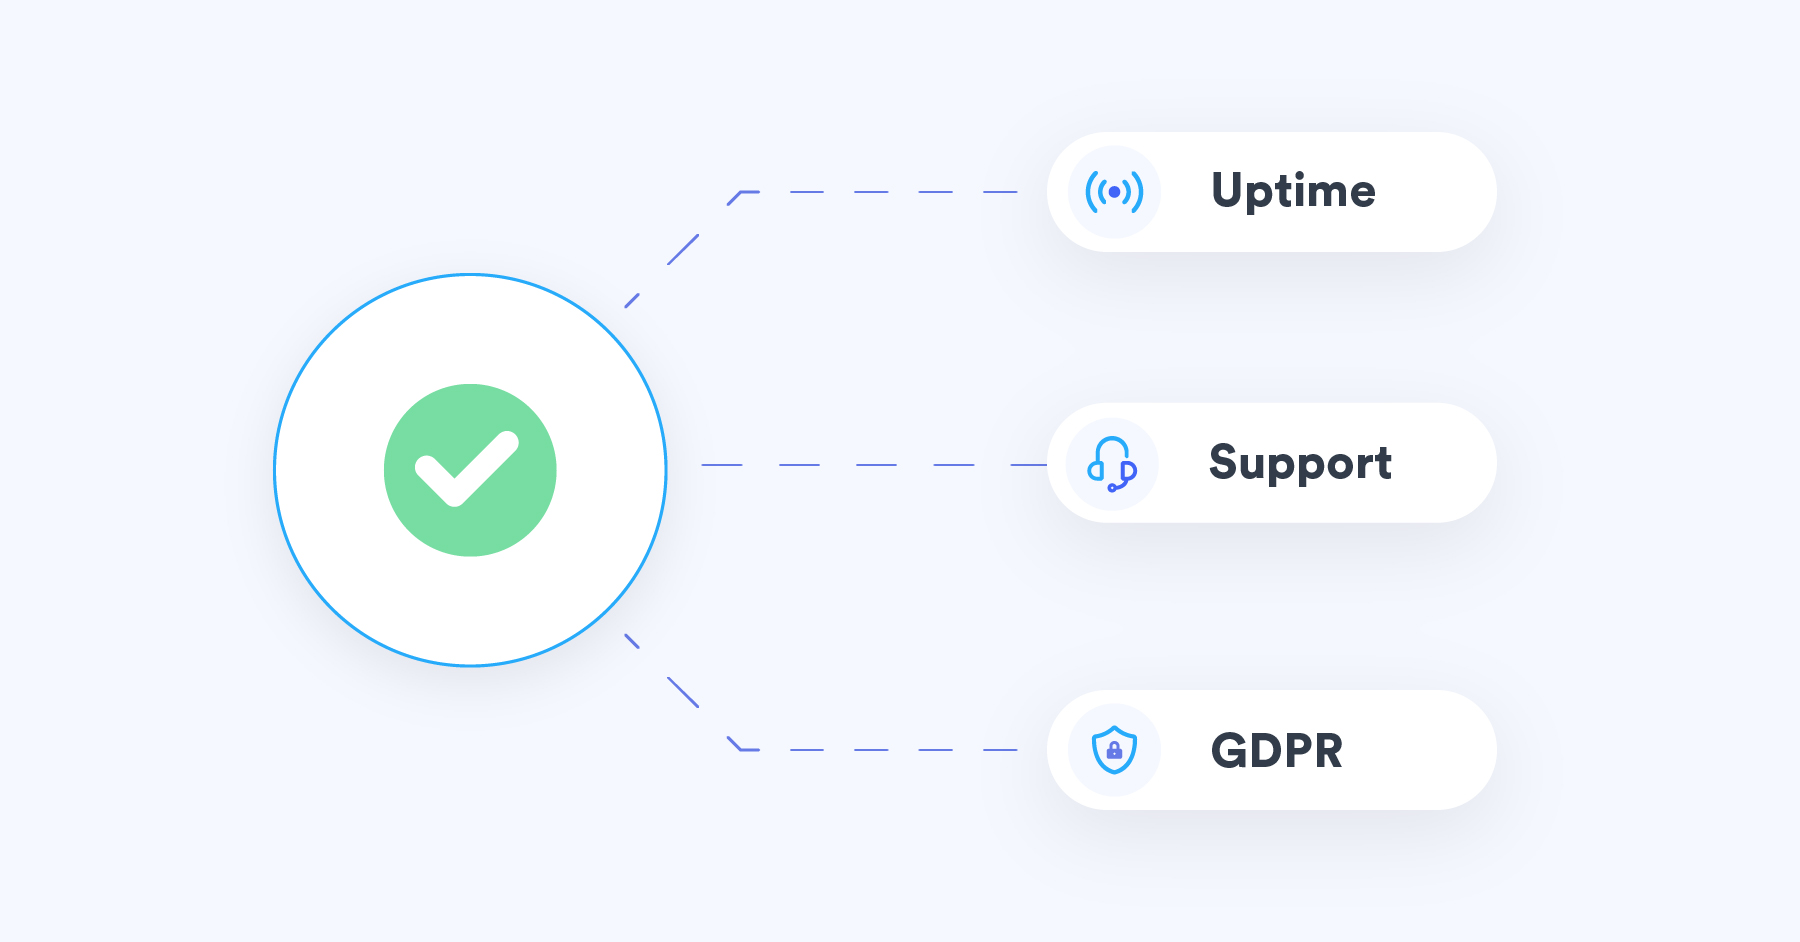 Choose an SMS gateway with good uptime, support and GDPR compliance